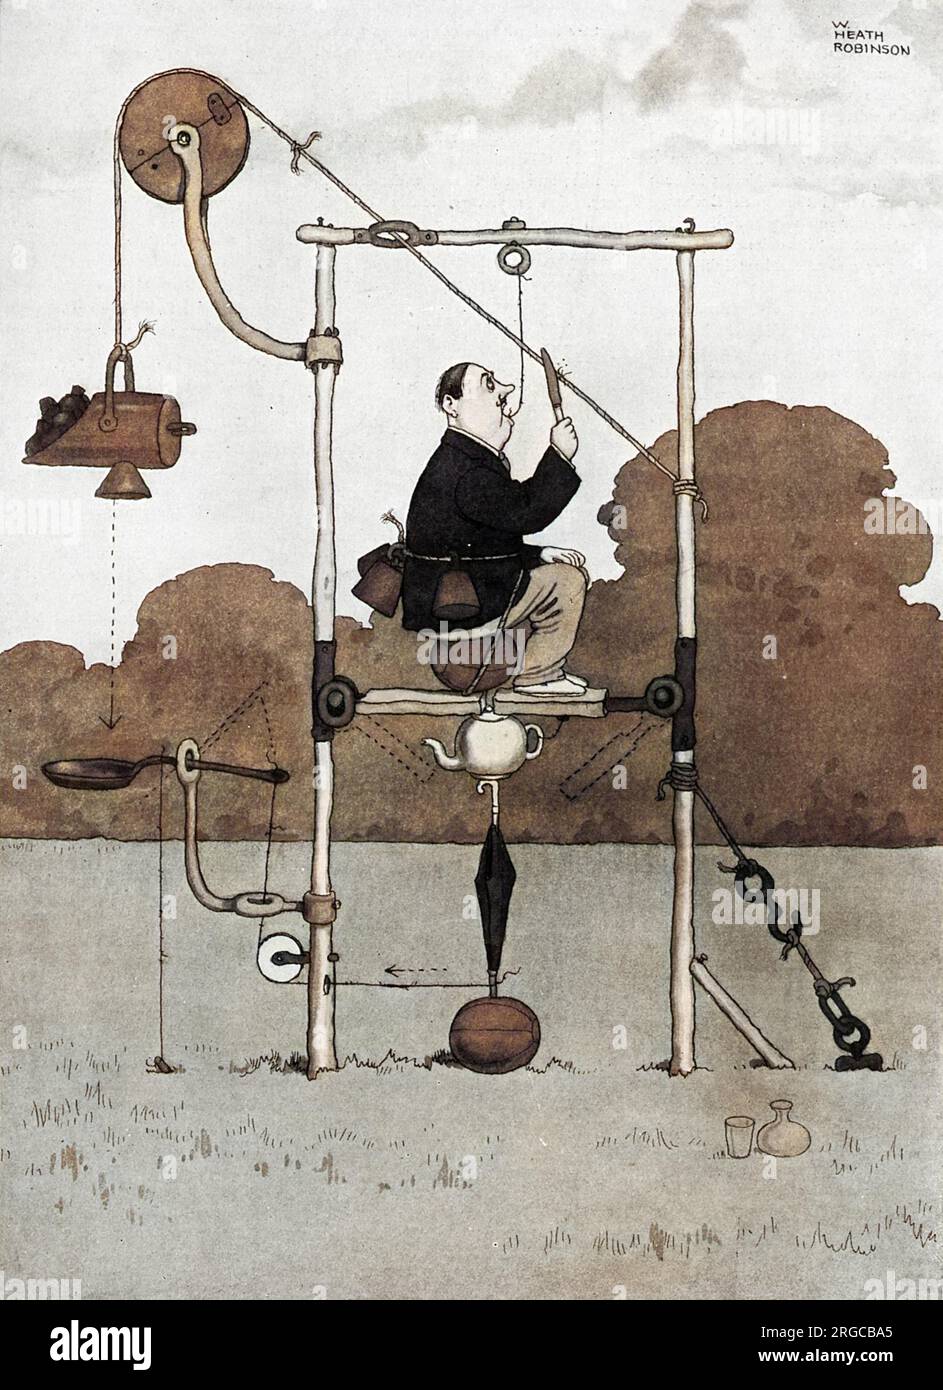 Another well-thought-out experiment in dentistry from Heath Robinson, the Gadget King and mastermind behind endless convoluted contraptions and silly ideas. Stock Photo